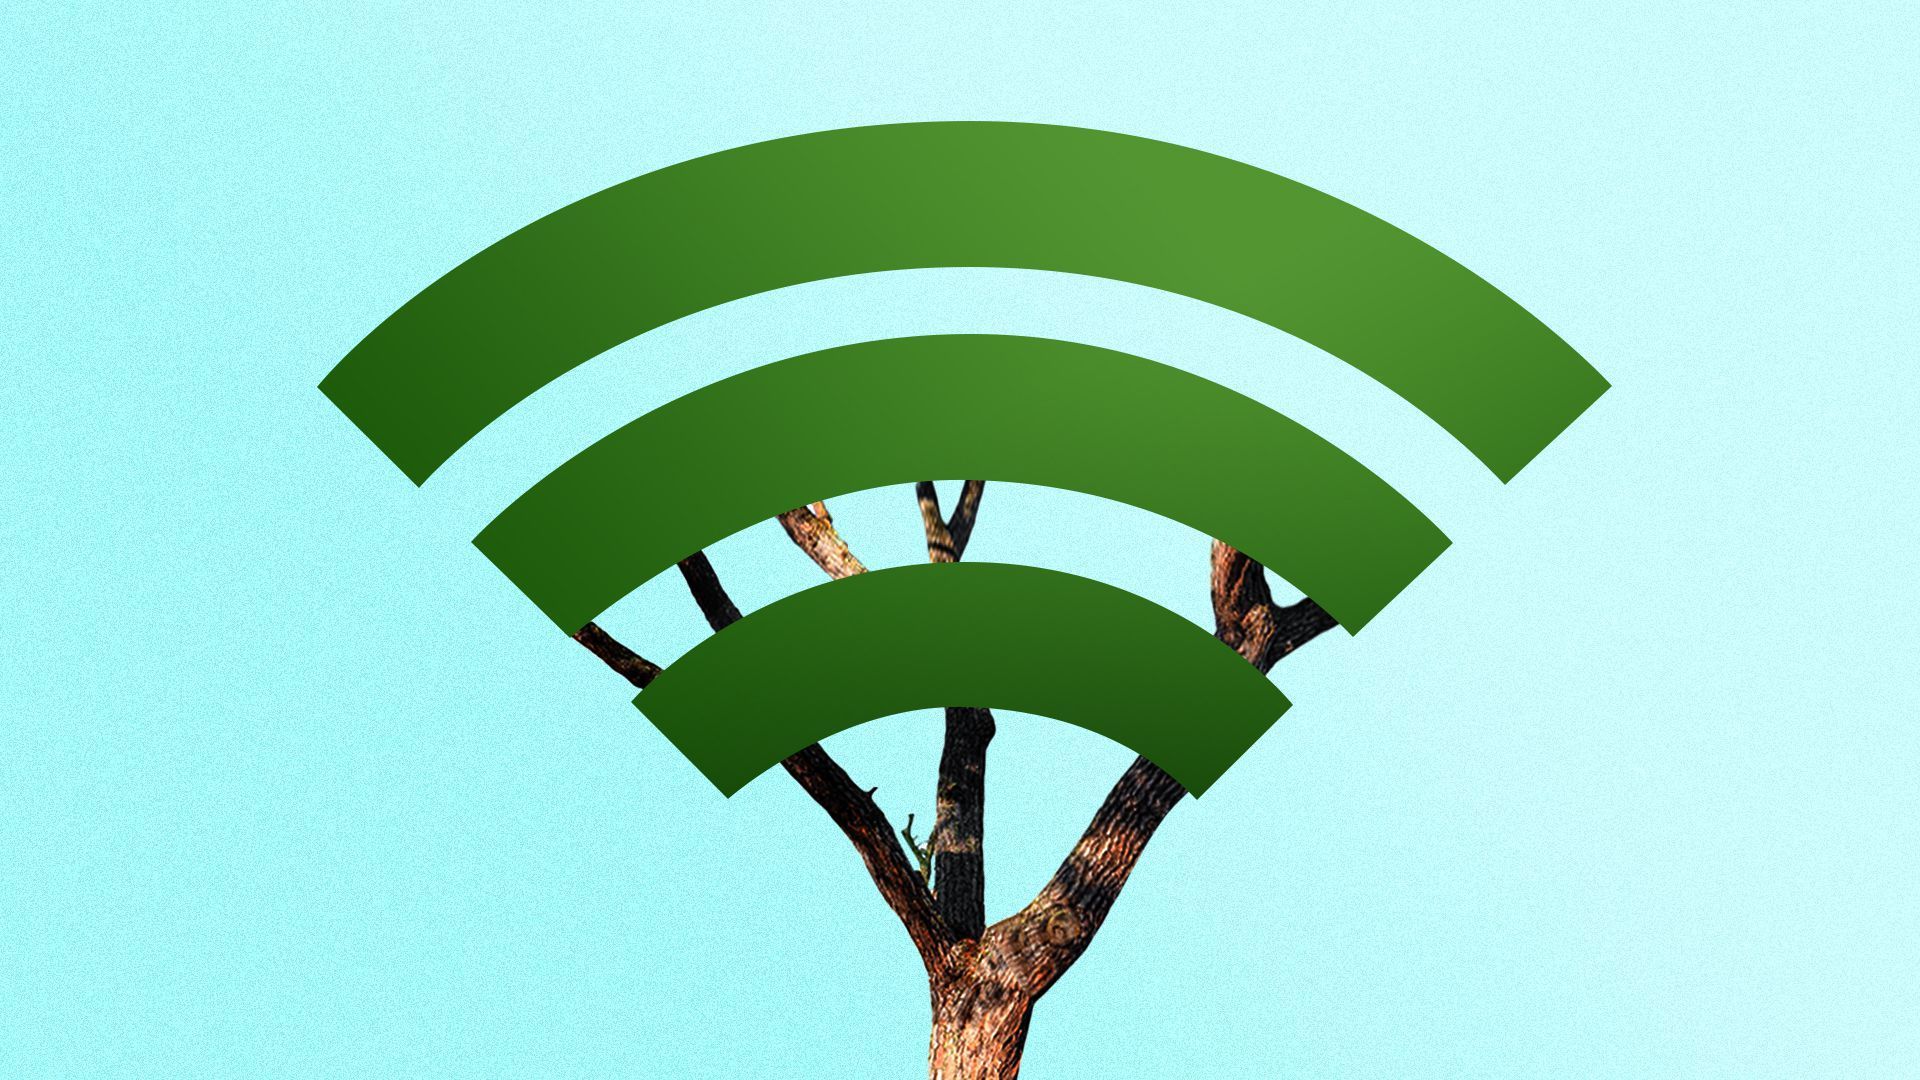 An illustration of a wireless signal growing out of a tree